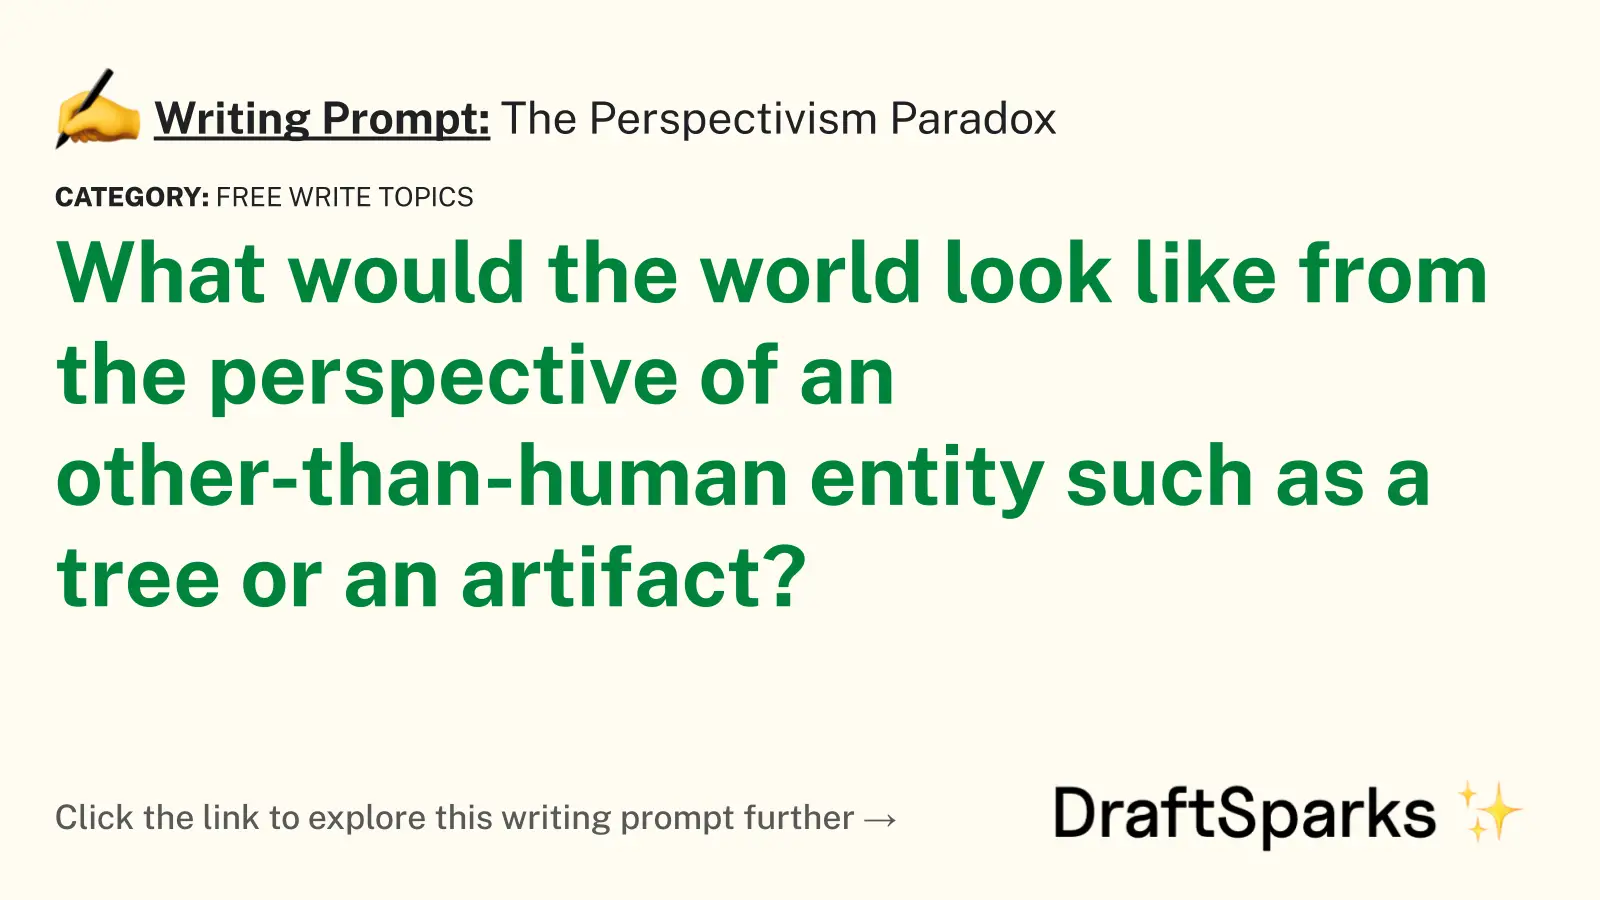 The Perspectivism Paradox